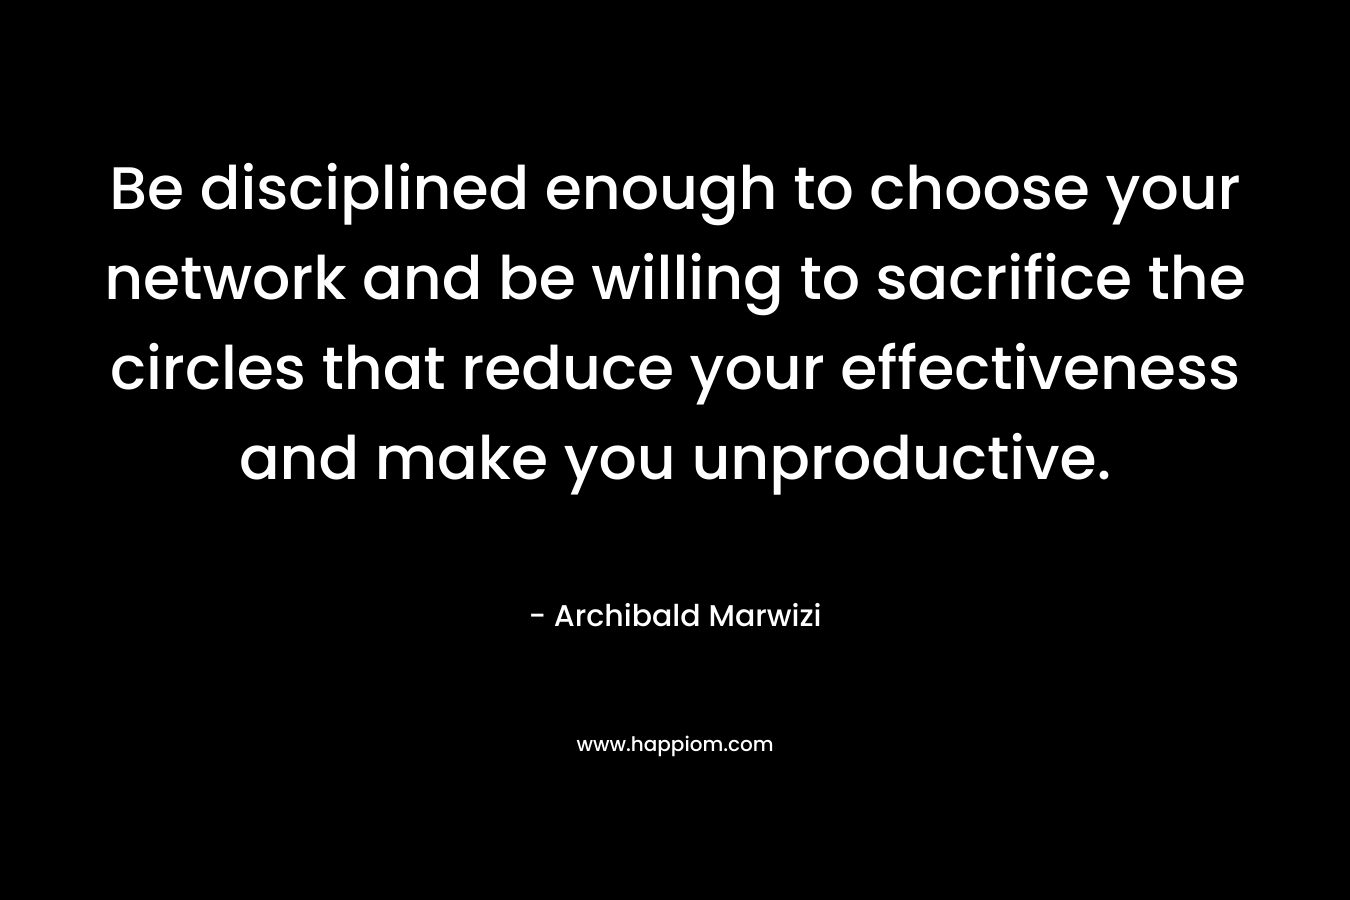 Be disciplined enough to choose your network and be willing to sacrifice the circles that reduce your effectiveness and make you unproductive.